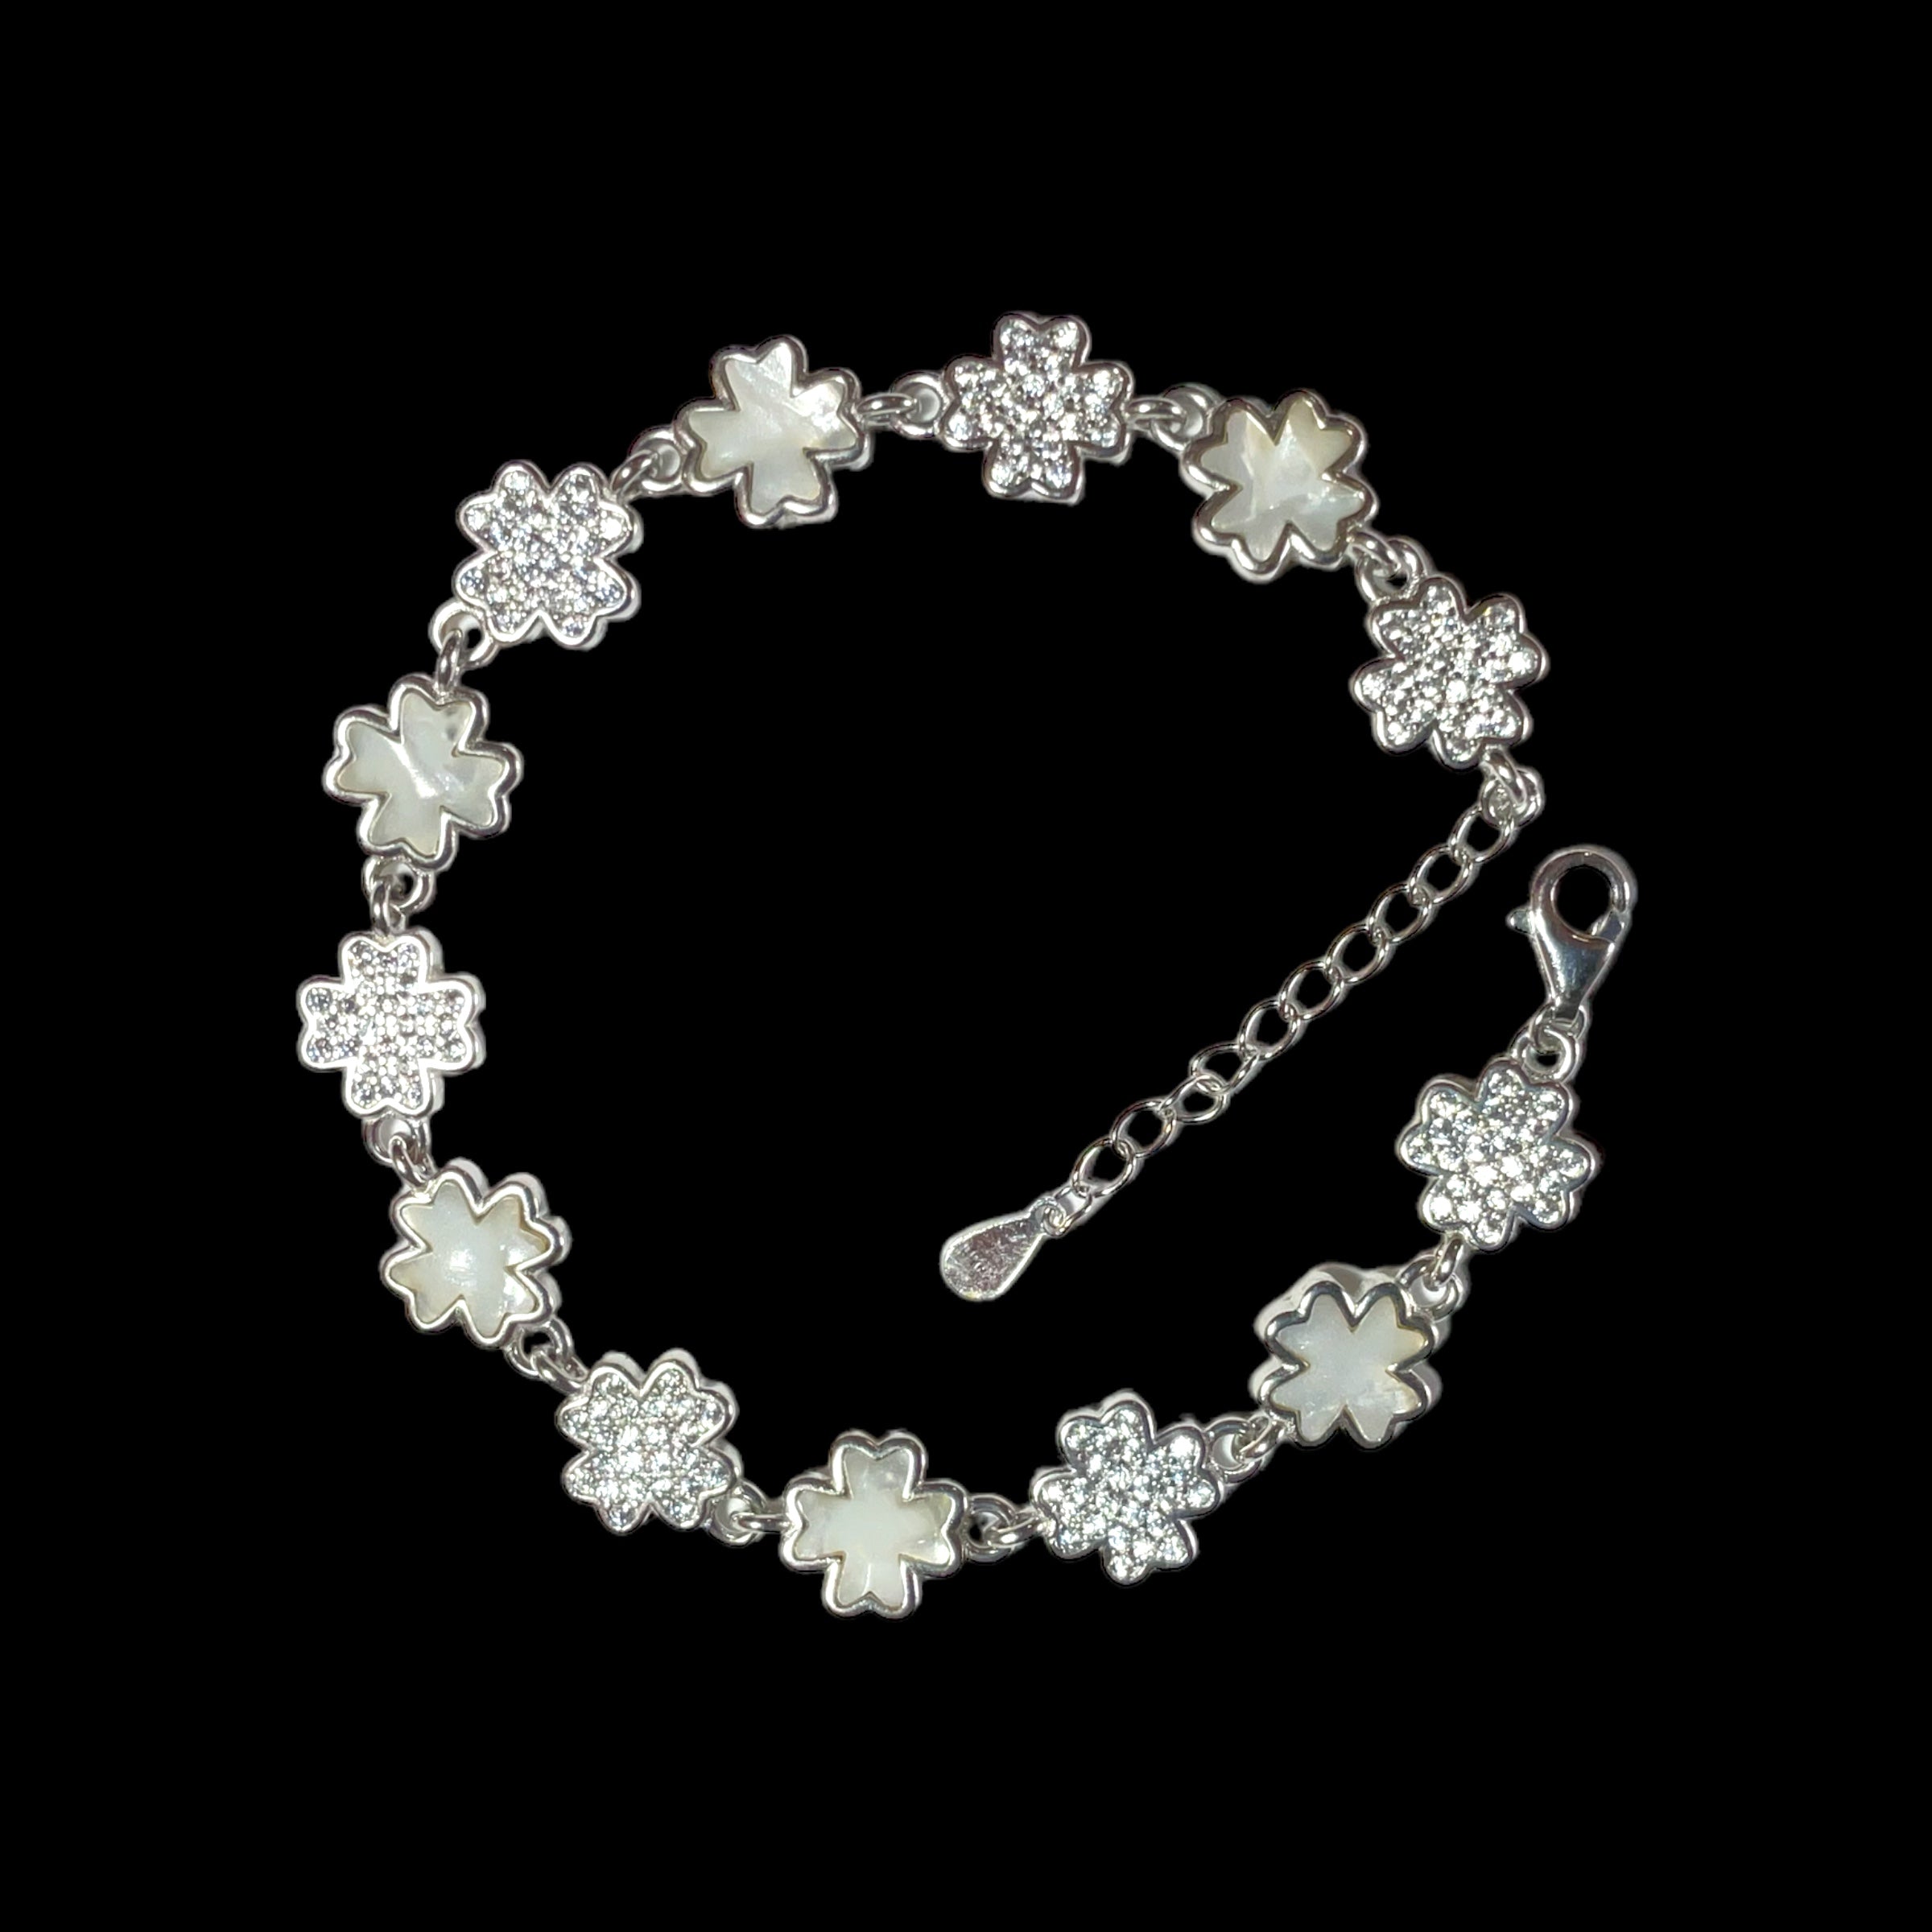 a white bracelet with flowers and a chain